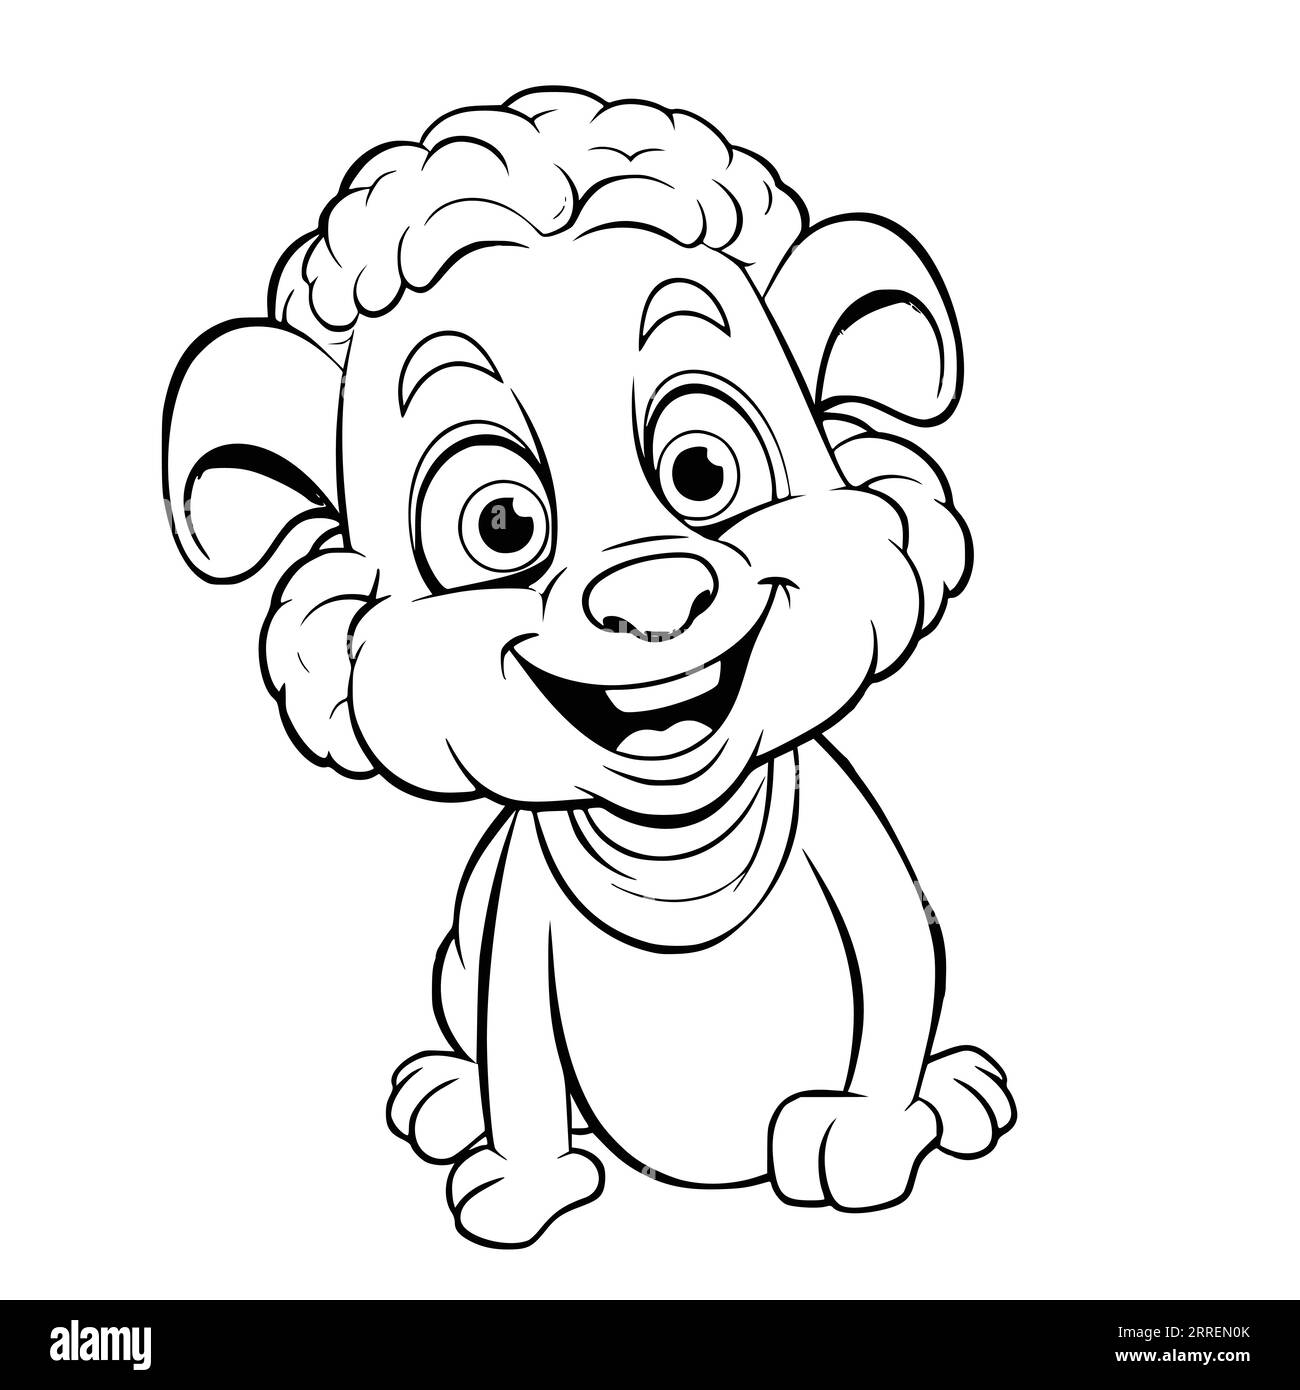 Bed Bugs Coloring Page for Kids Stock Vector